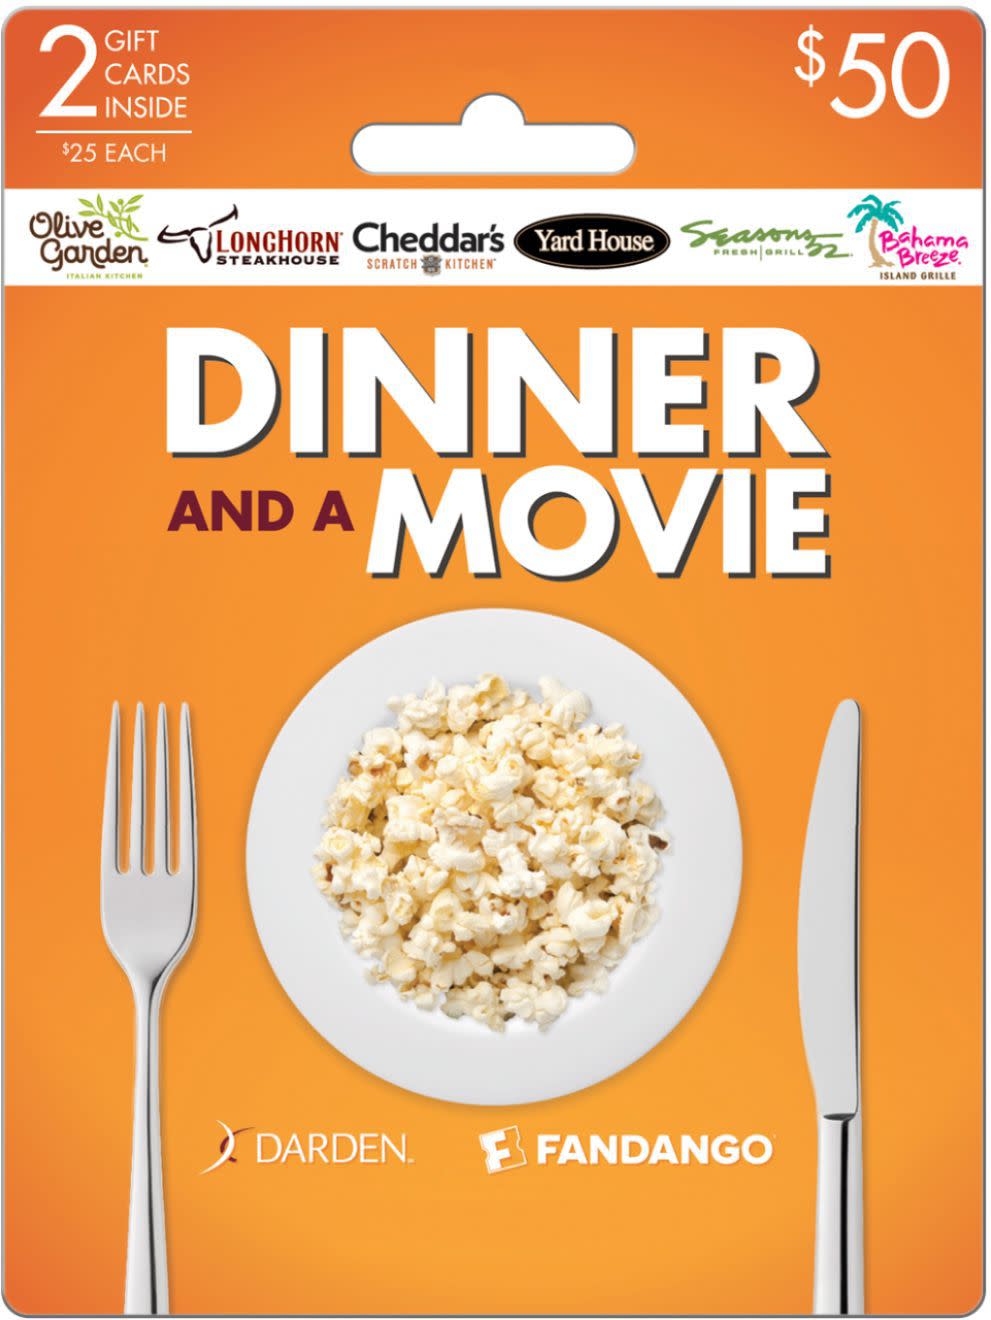 Dinner and a Movie Giftcard